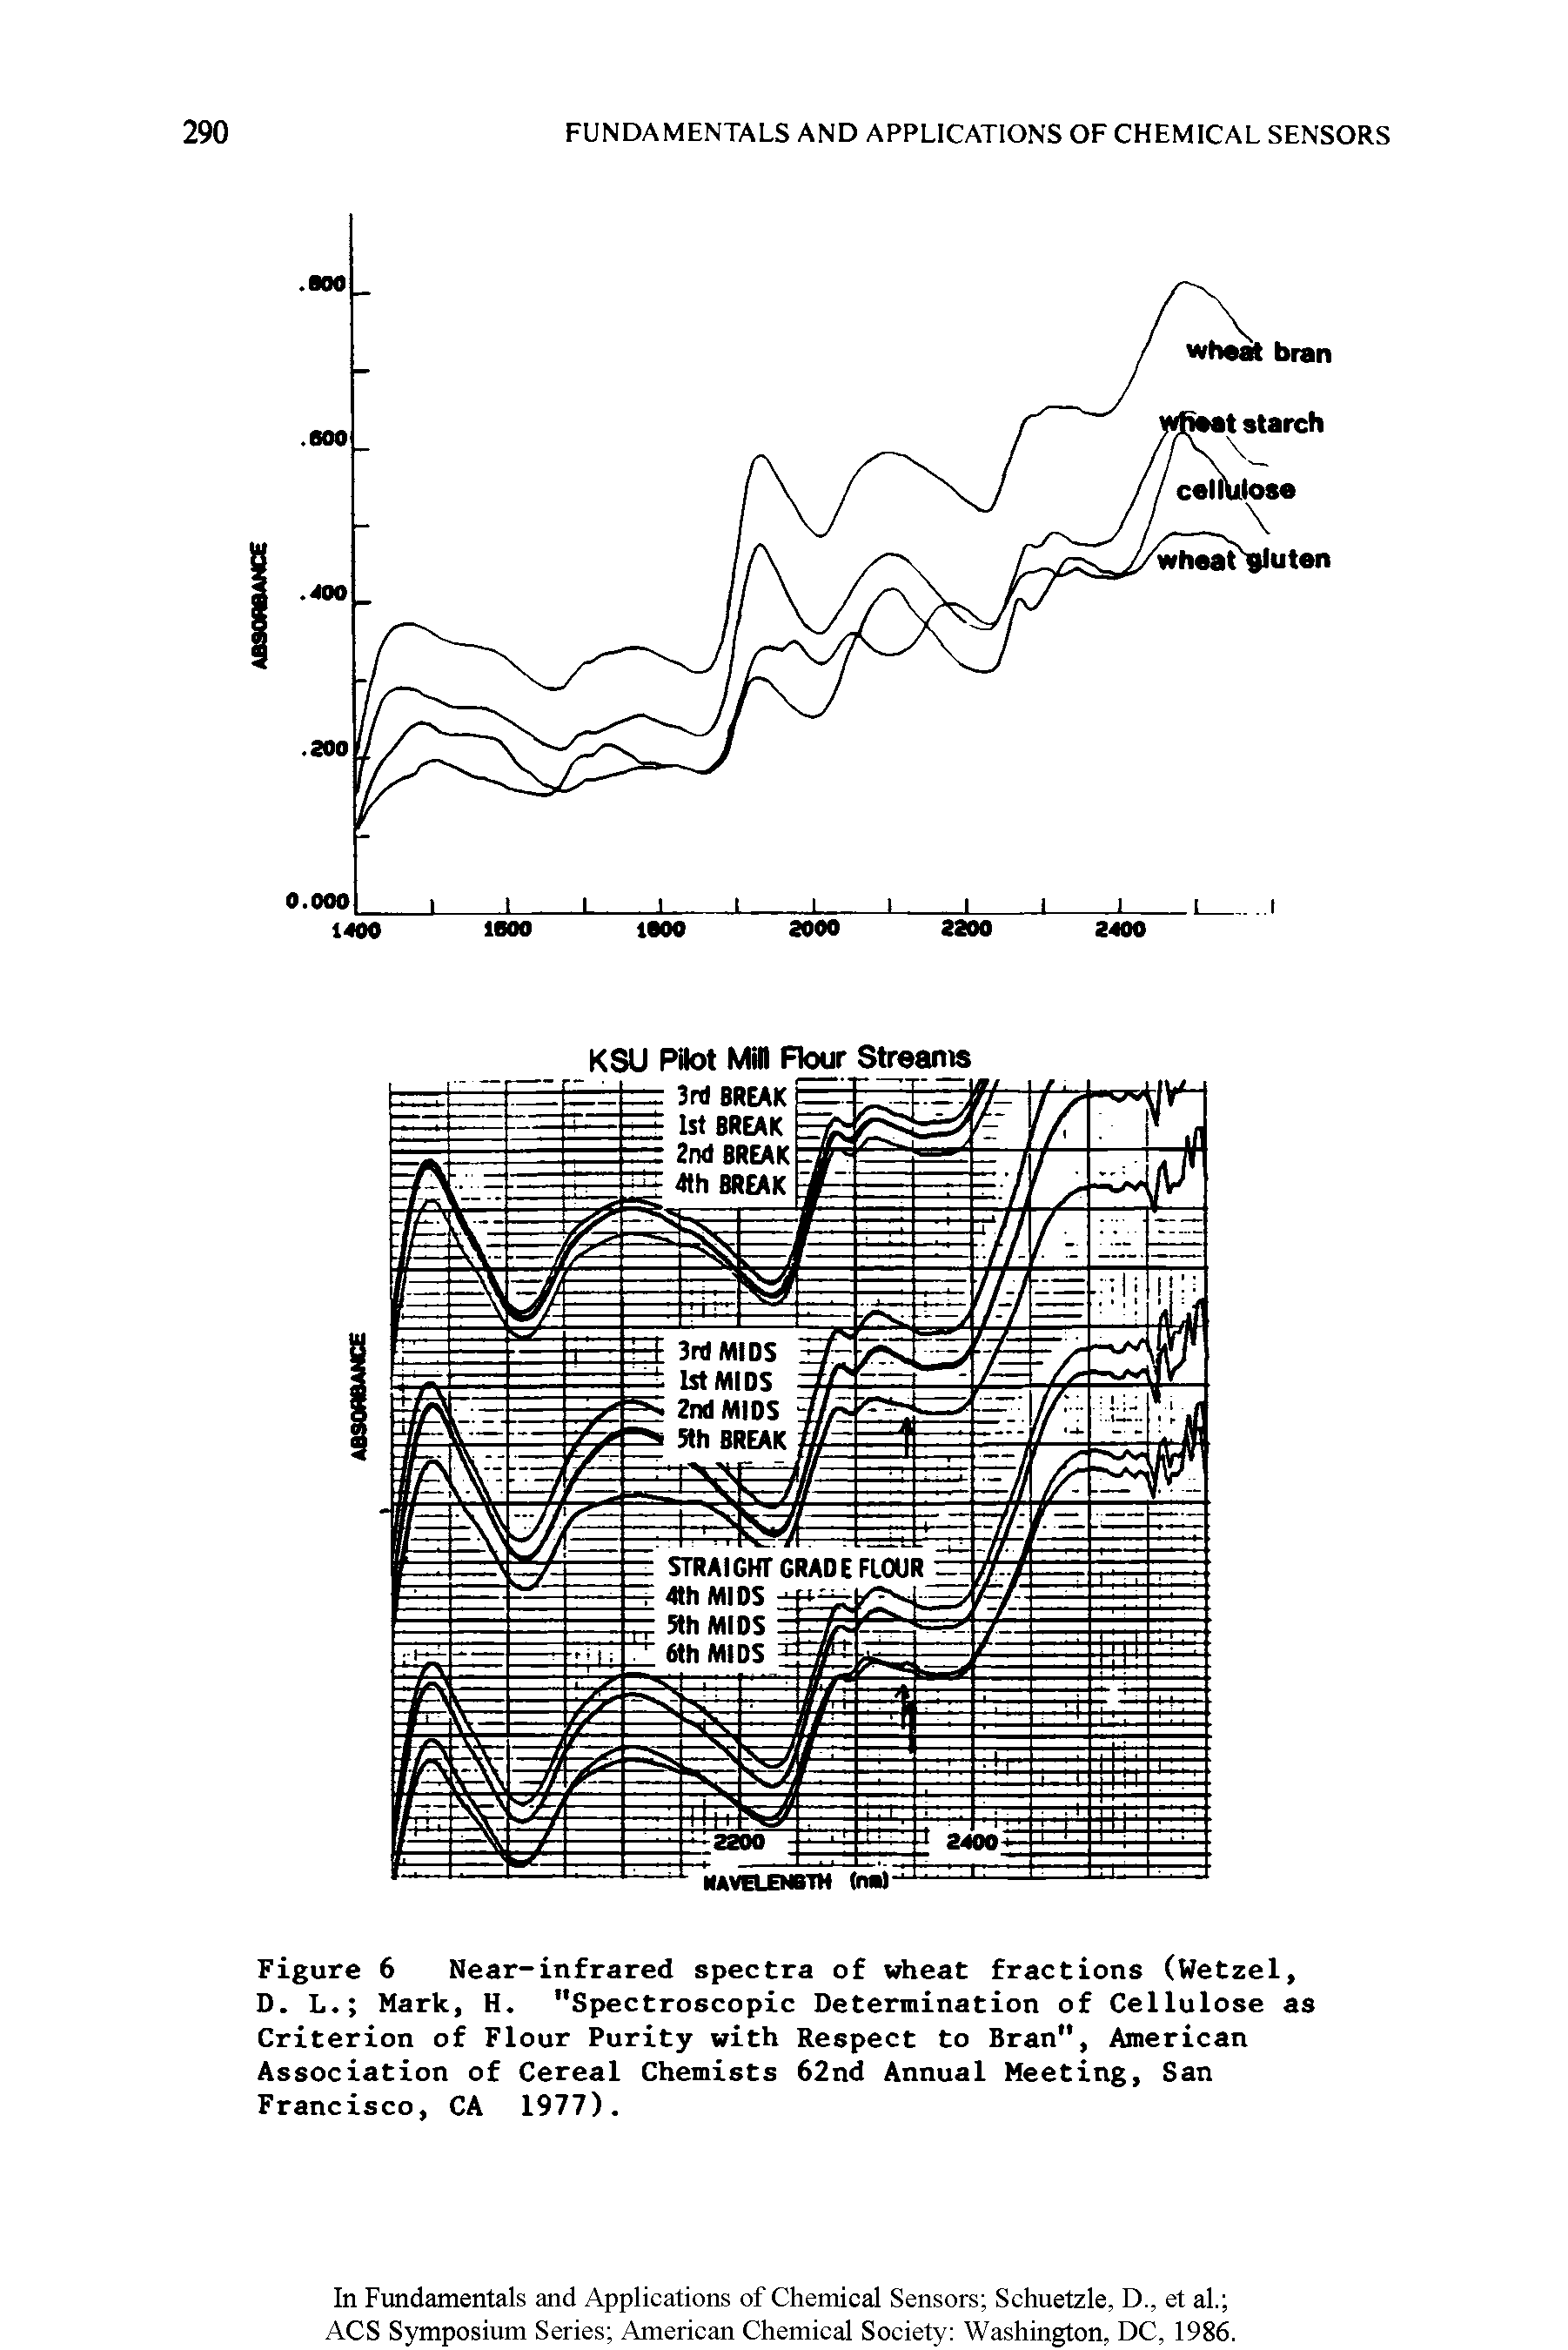 Figure 6 Near-infrared spectra of wheat fractions (Wetzel, D. L. Mark, H. "Spectroscopic Determination of Cellulose as Criterion of Flour Purity with Respect to Bran", American Association of Cereal Chemists 62nd Annual Meeting, San Francisco, CA 1977).